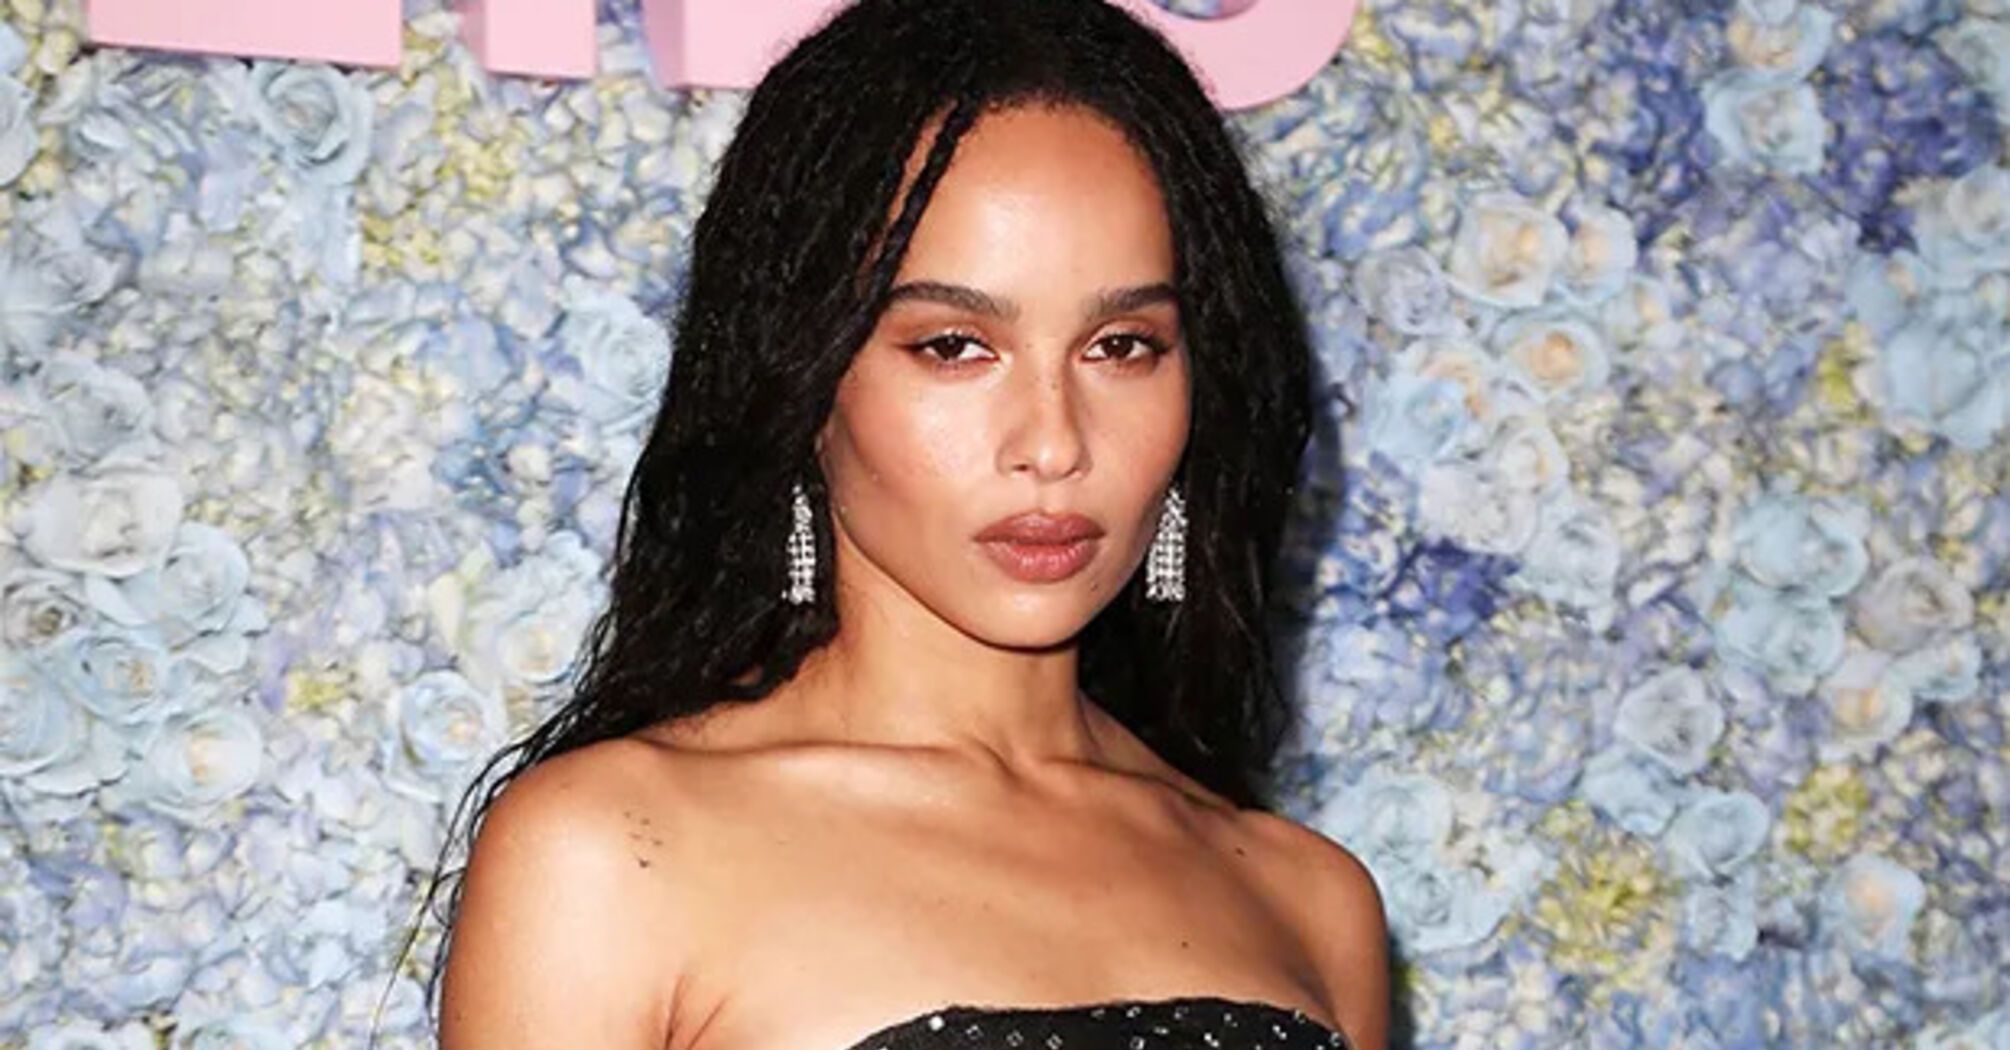 10 Facts about Zoe Kravitz, the X-Men Actress Who Now Plays Catwoman ...